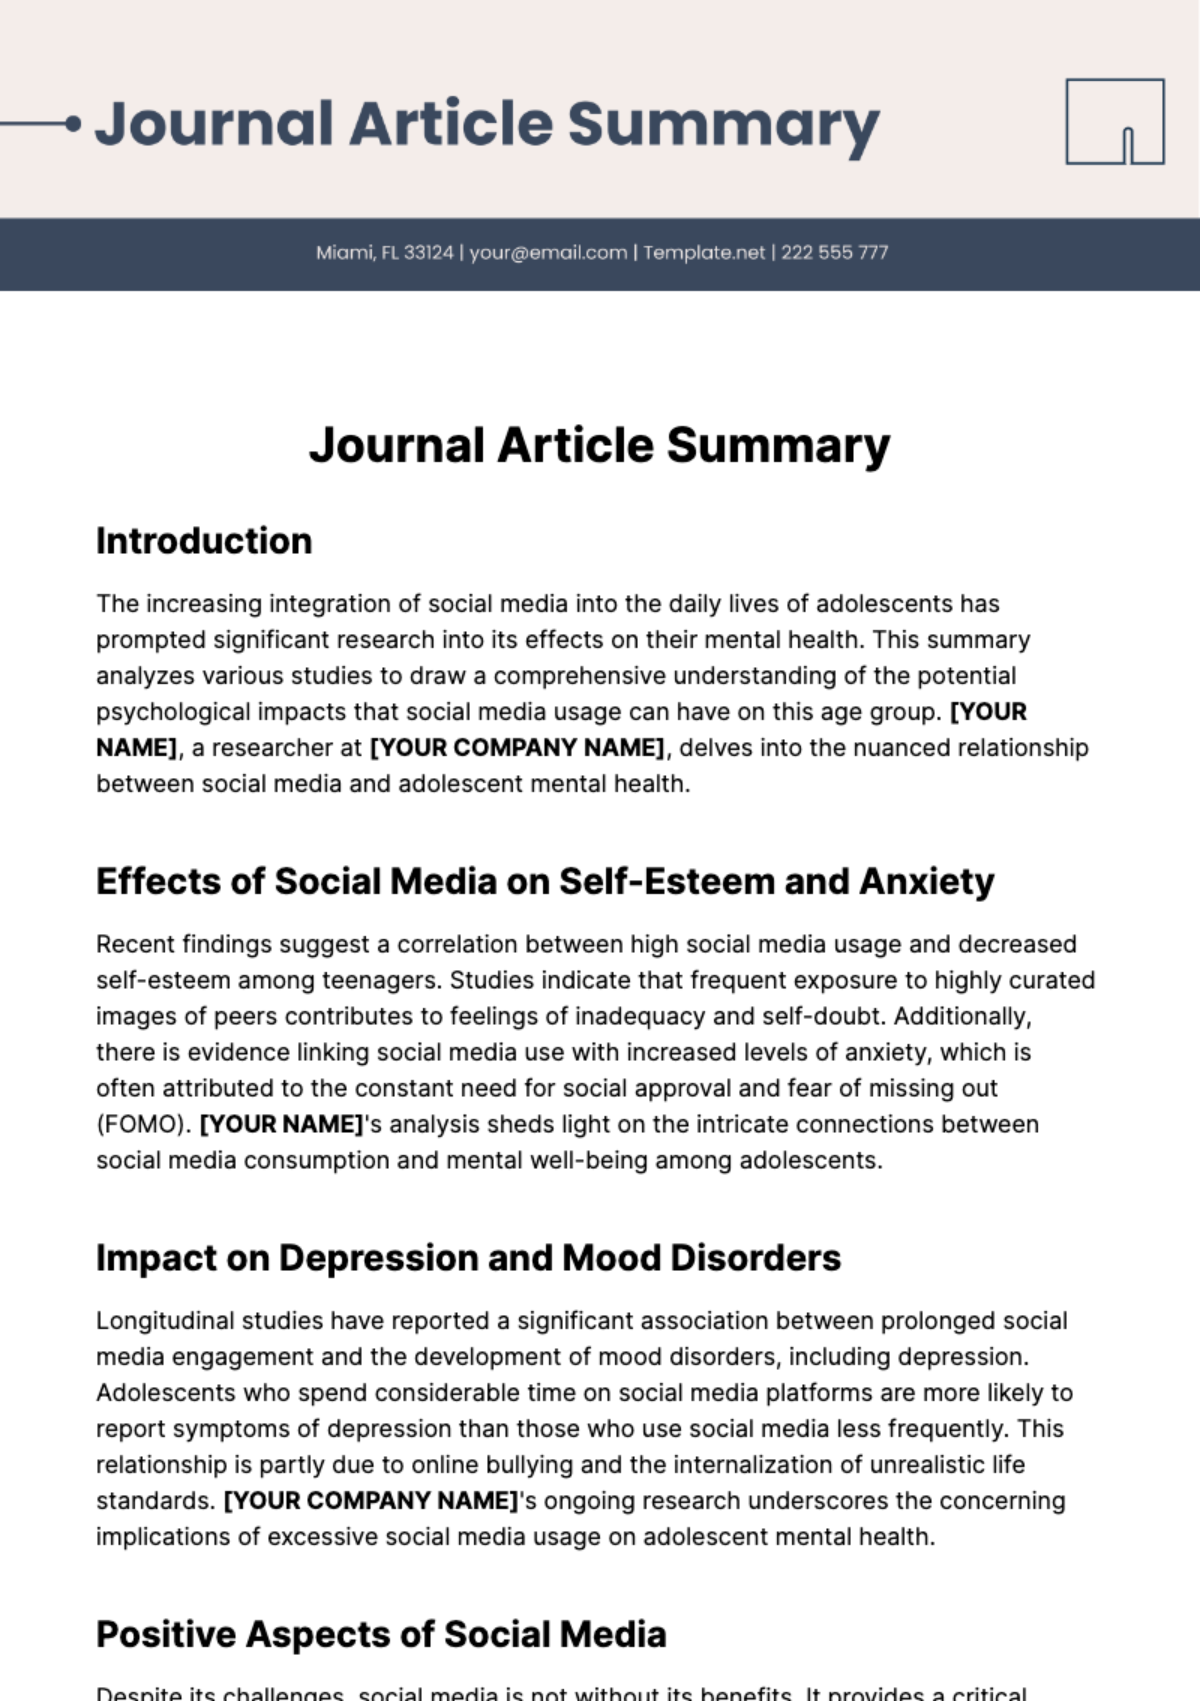 Free Journal Article Summary Template